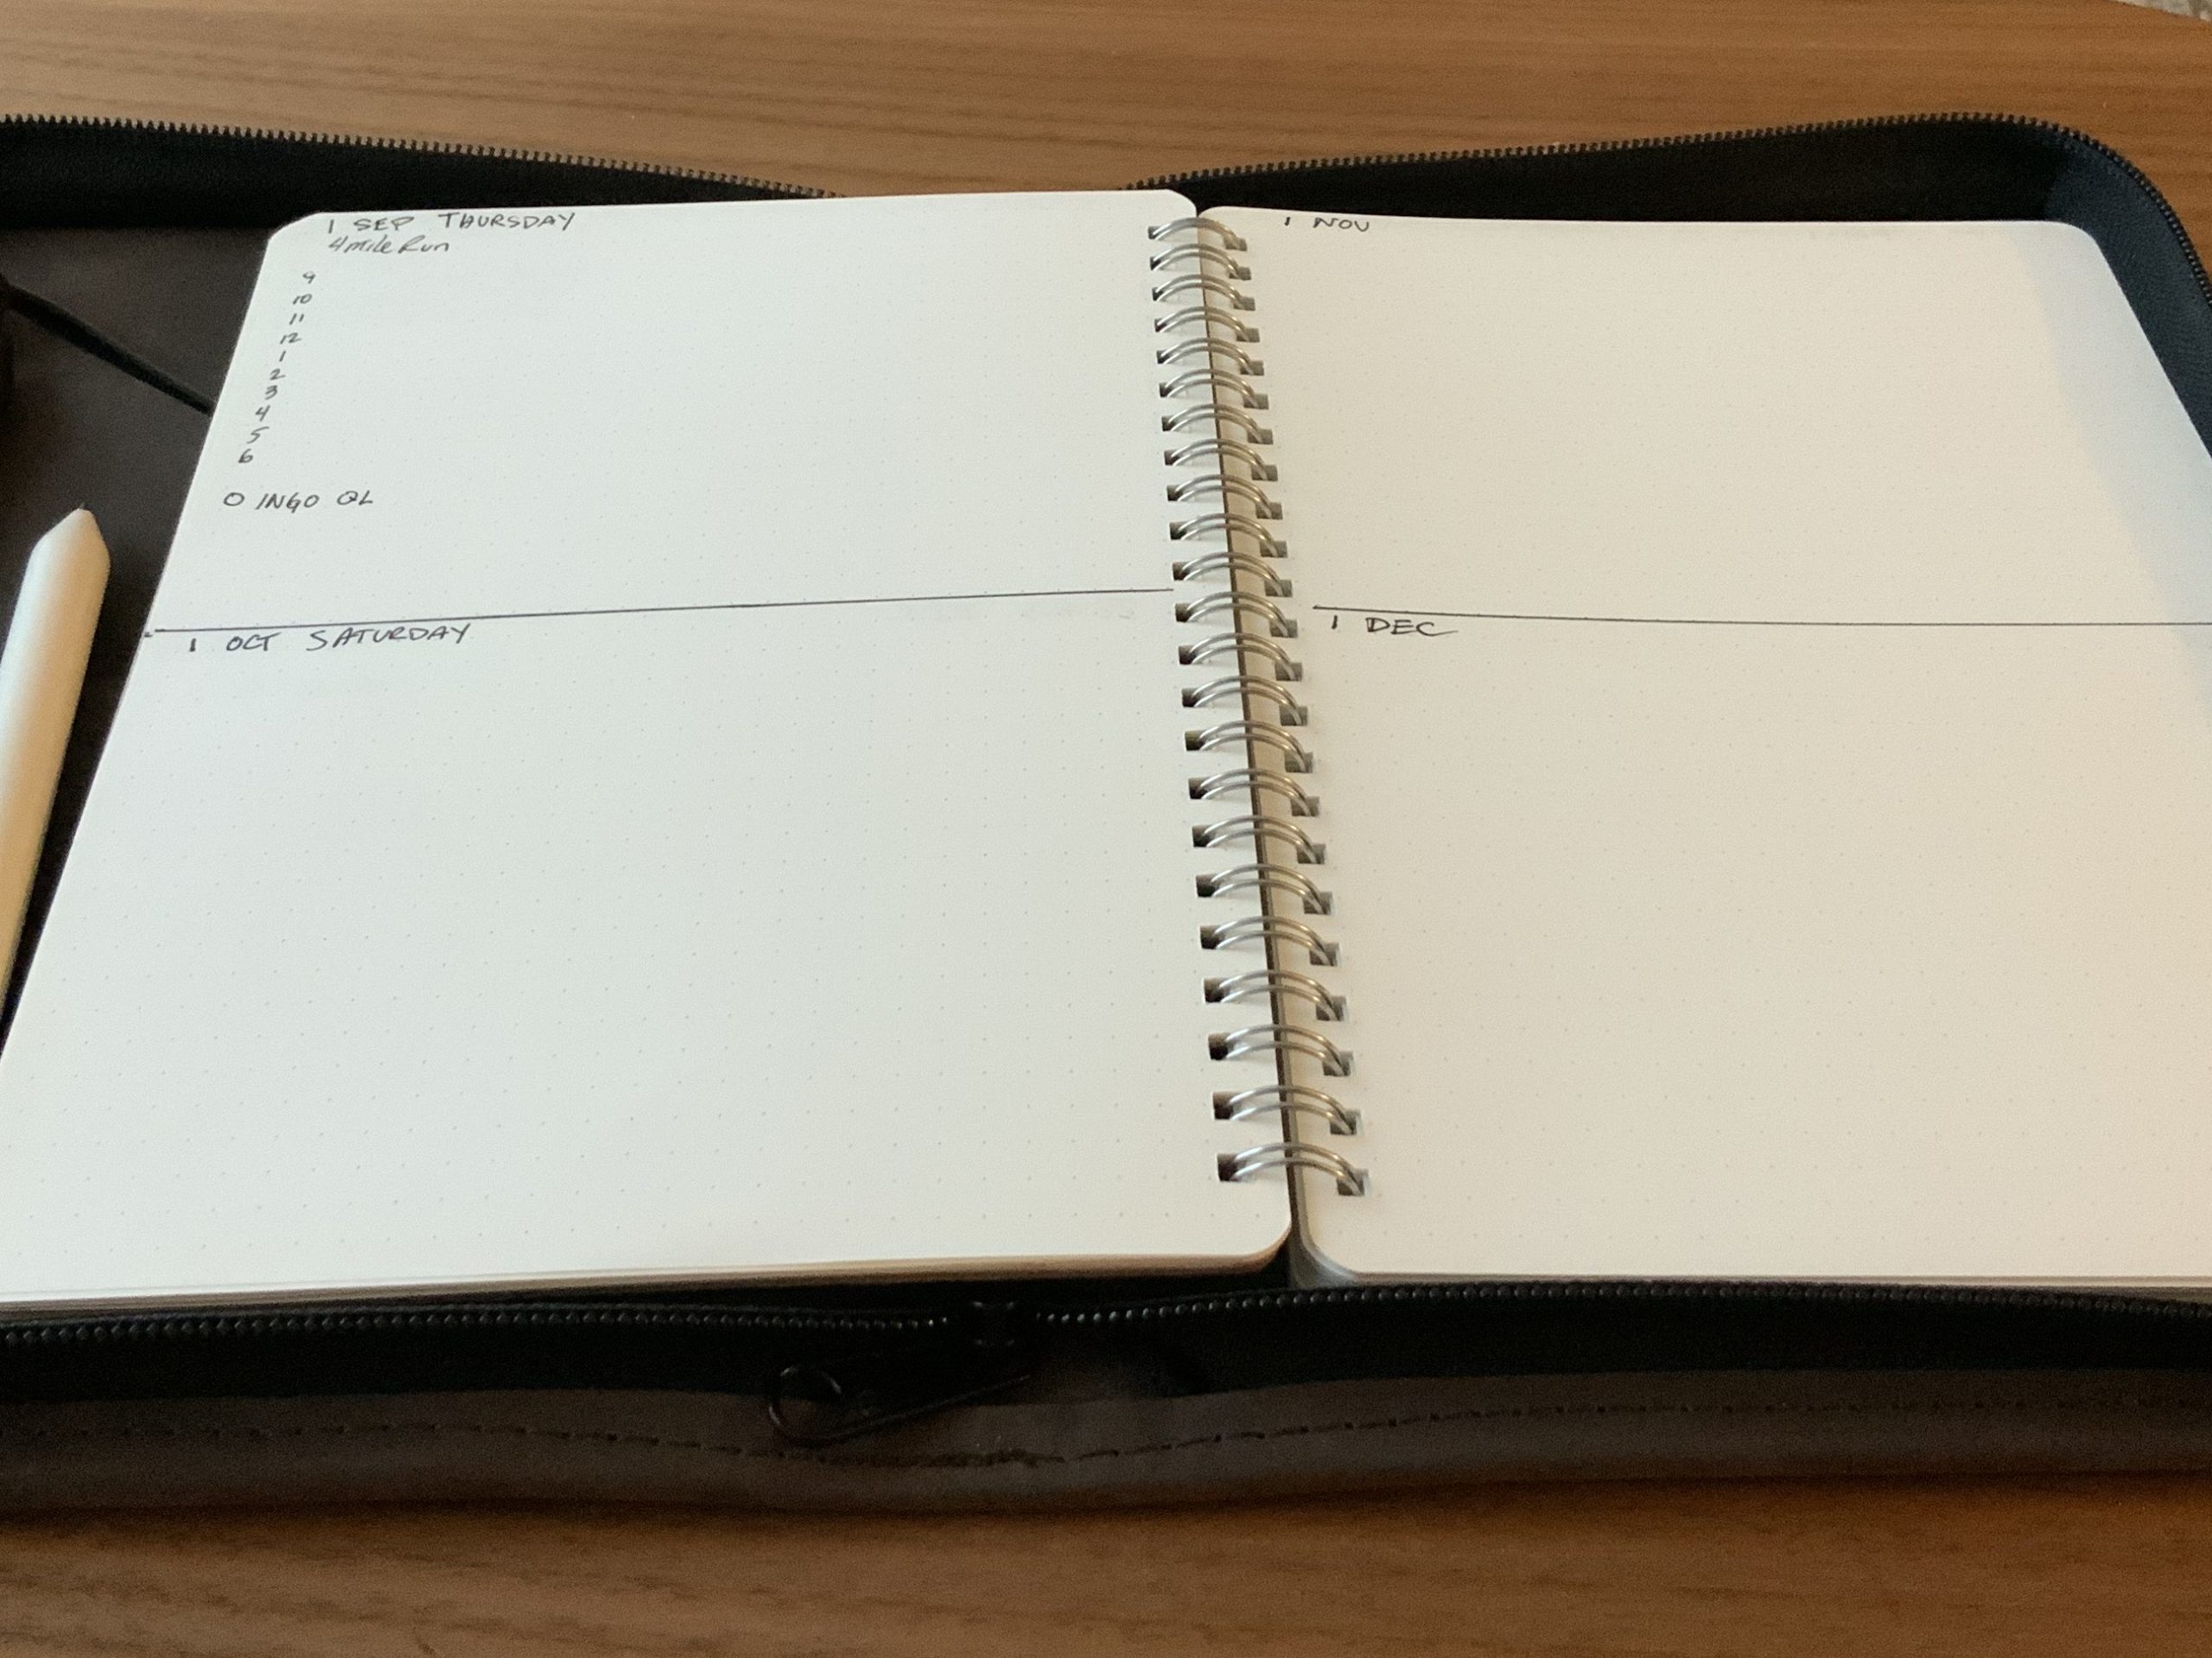 Prototype of a recurring journal showing Sep 1, Oct 1 on left hand page and Nov 1 and Dec 1 on right hand page